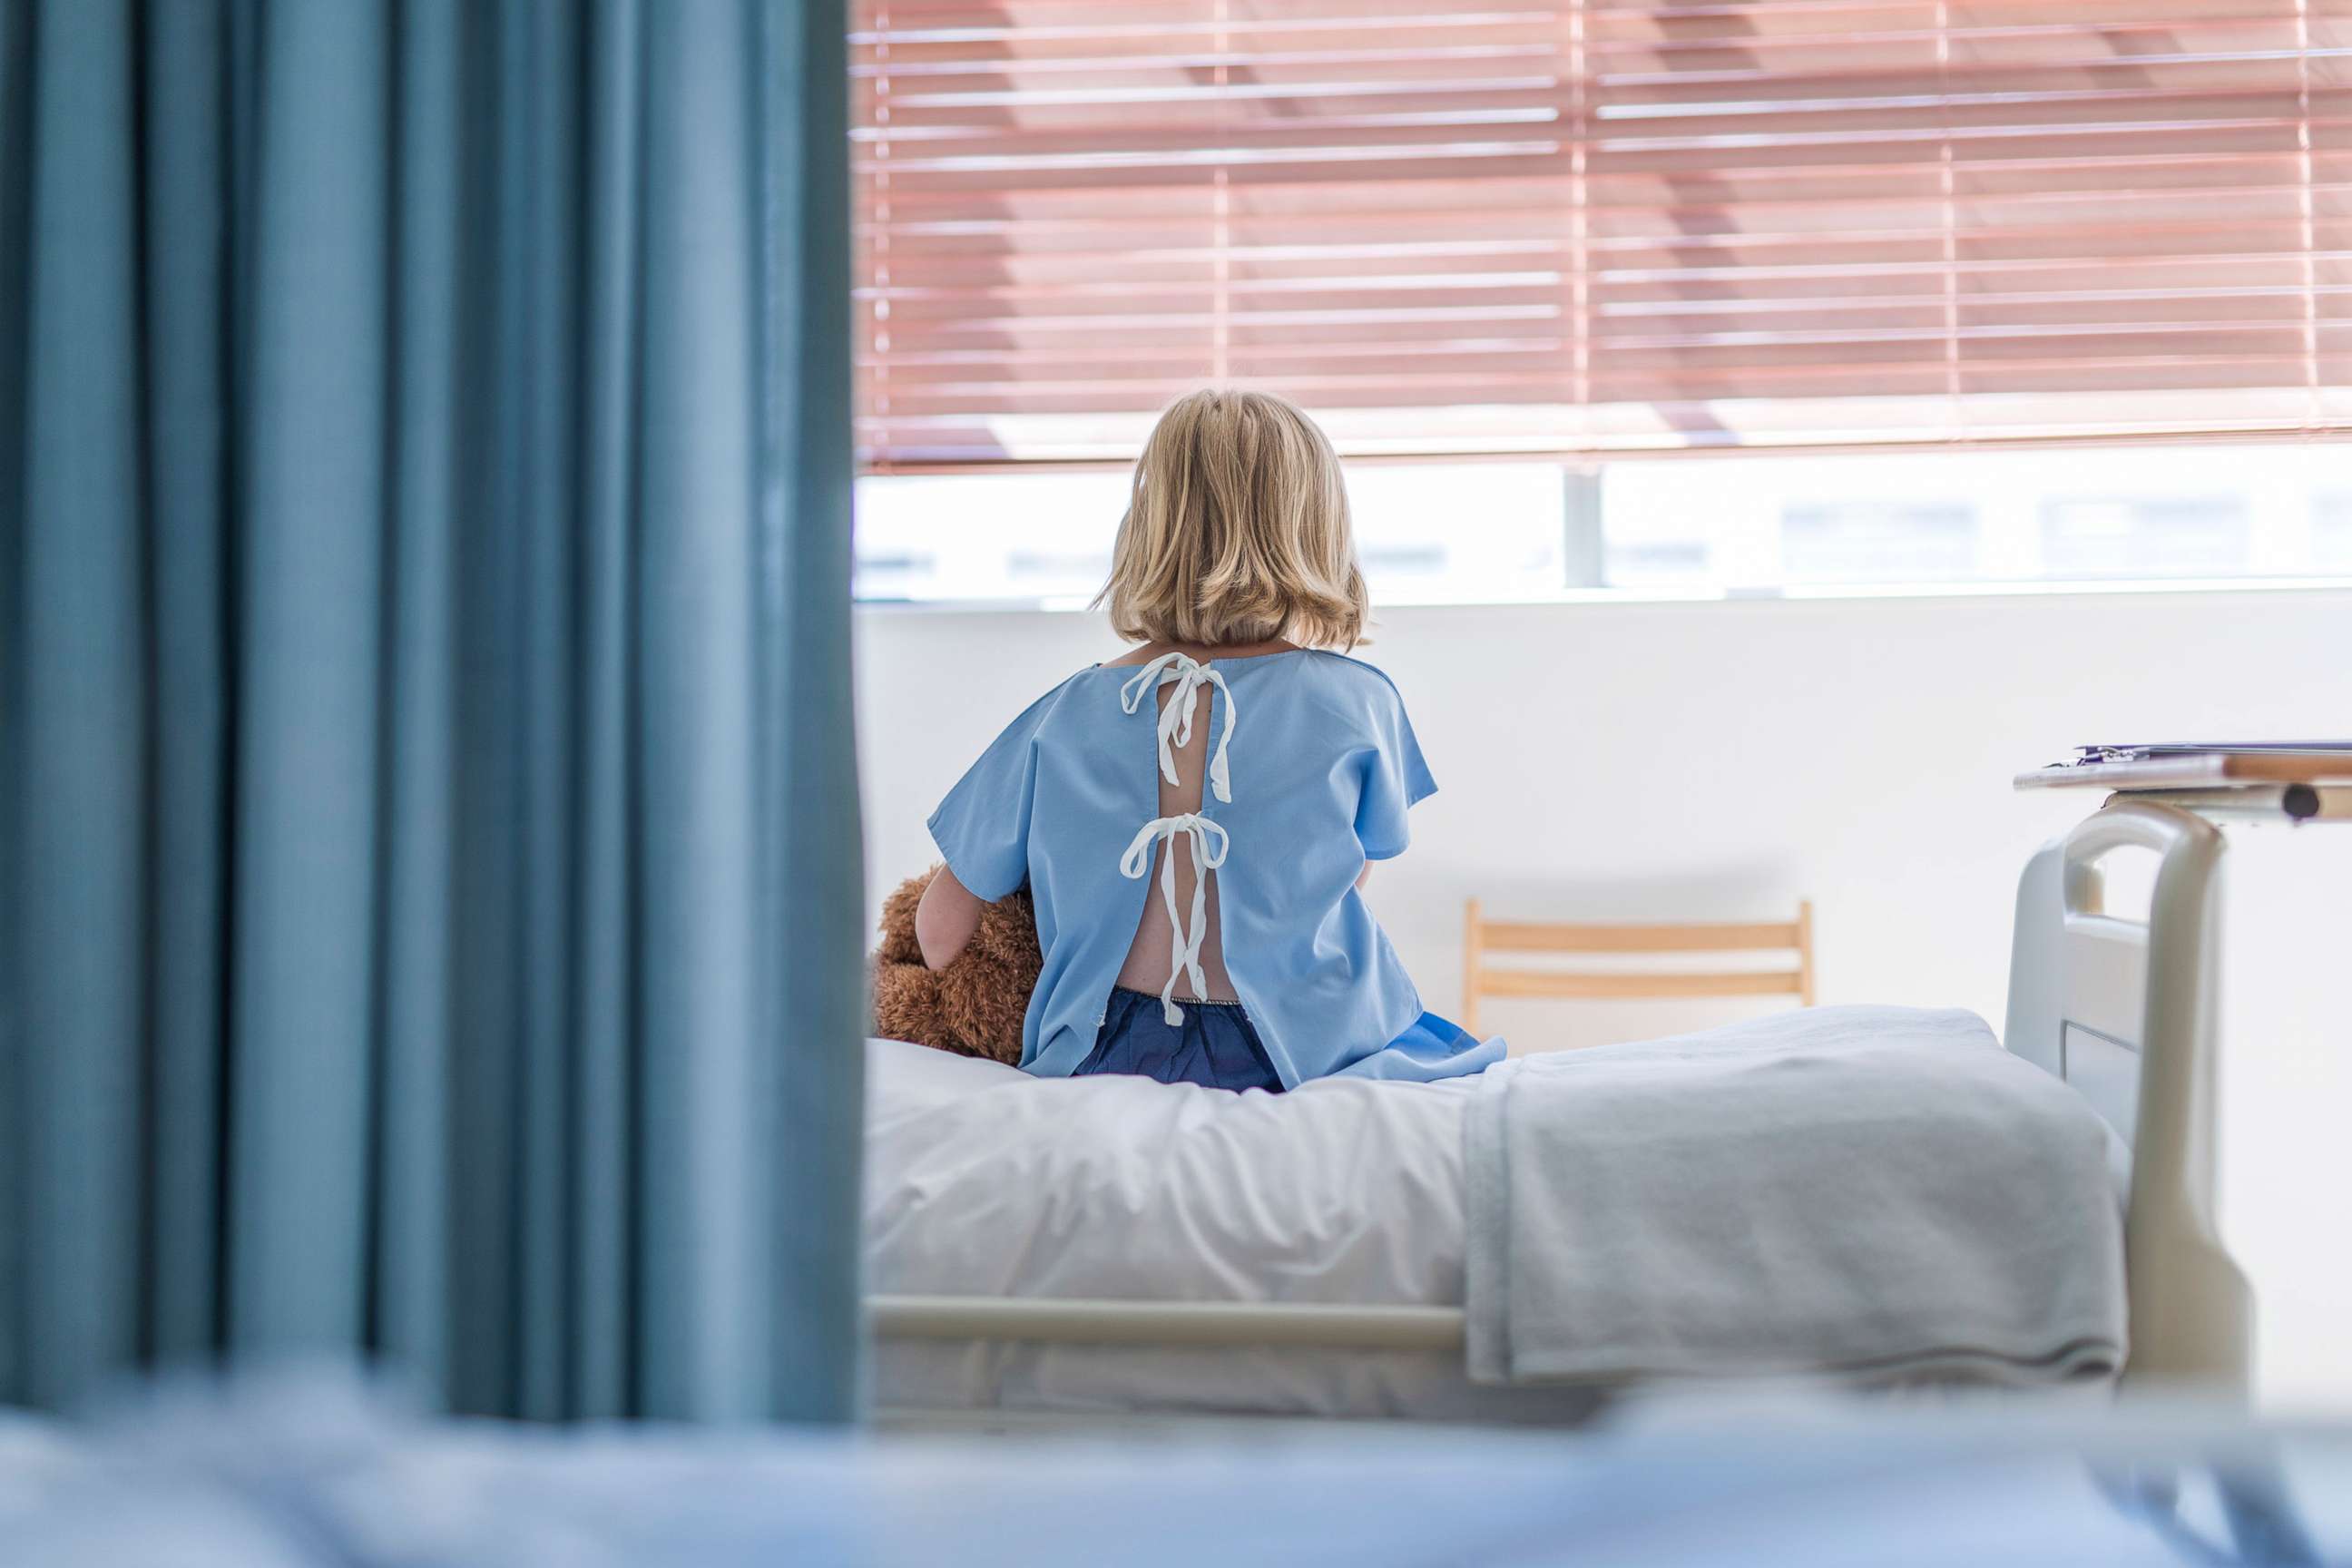 PHOTO: A child sits on bed while hospitalized, in a stock image.